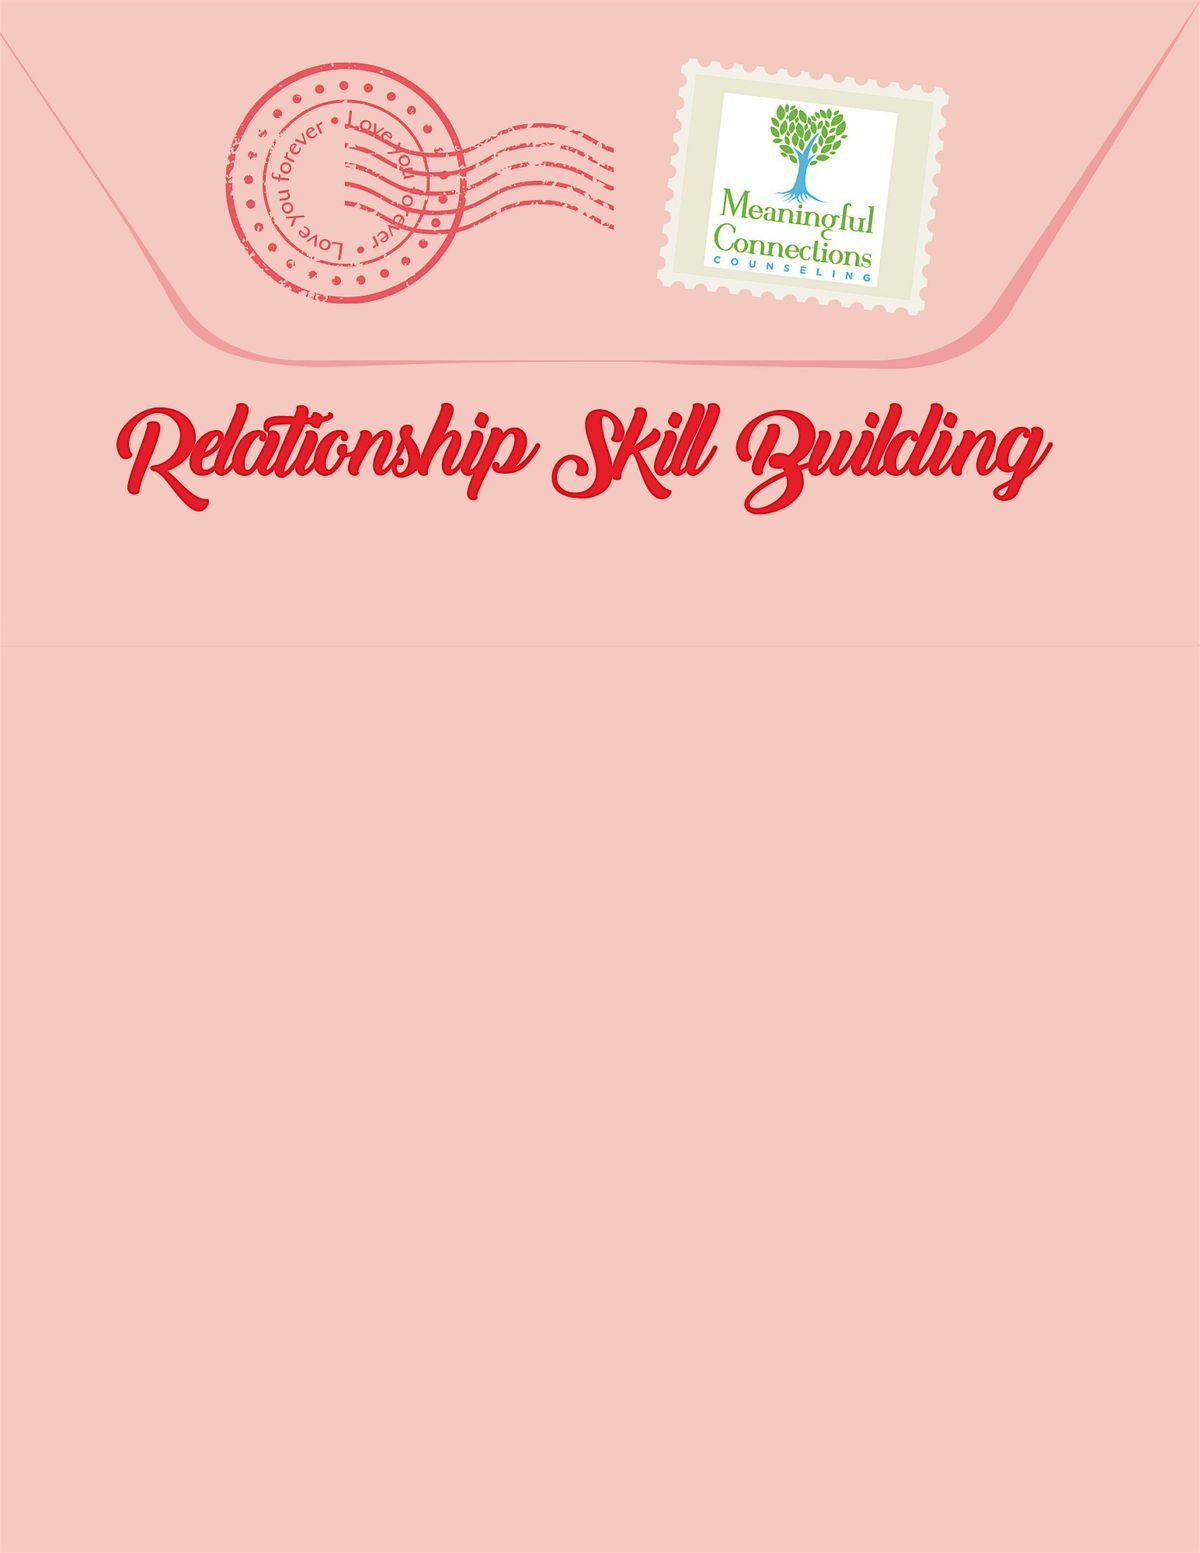 Relationship Skill Building Group